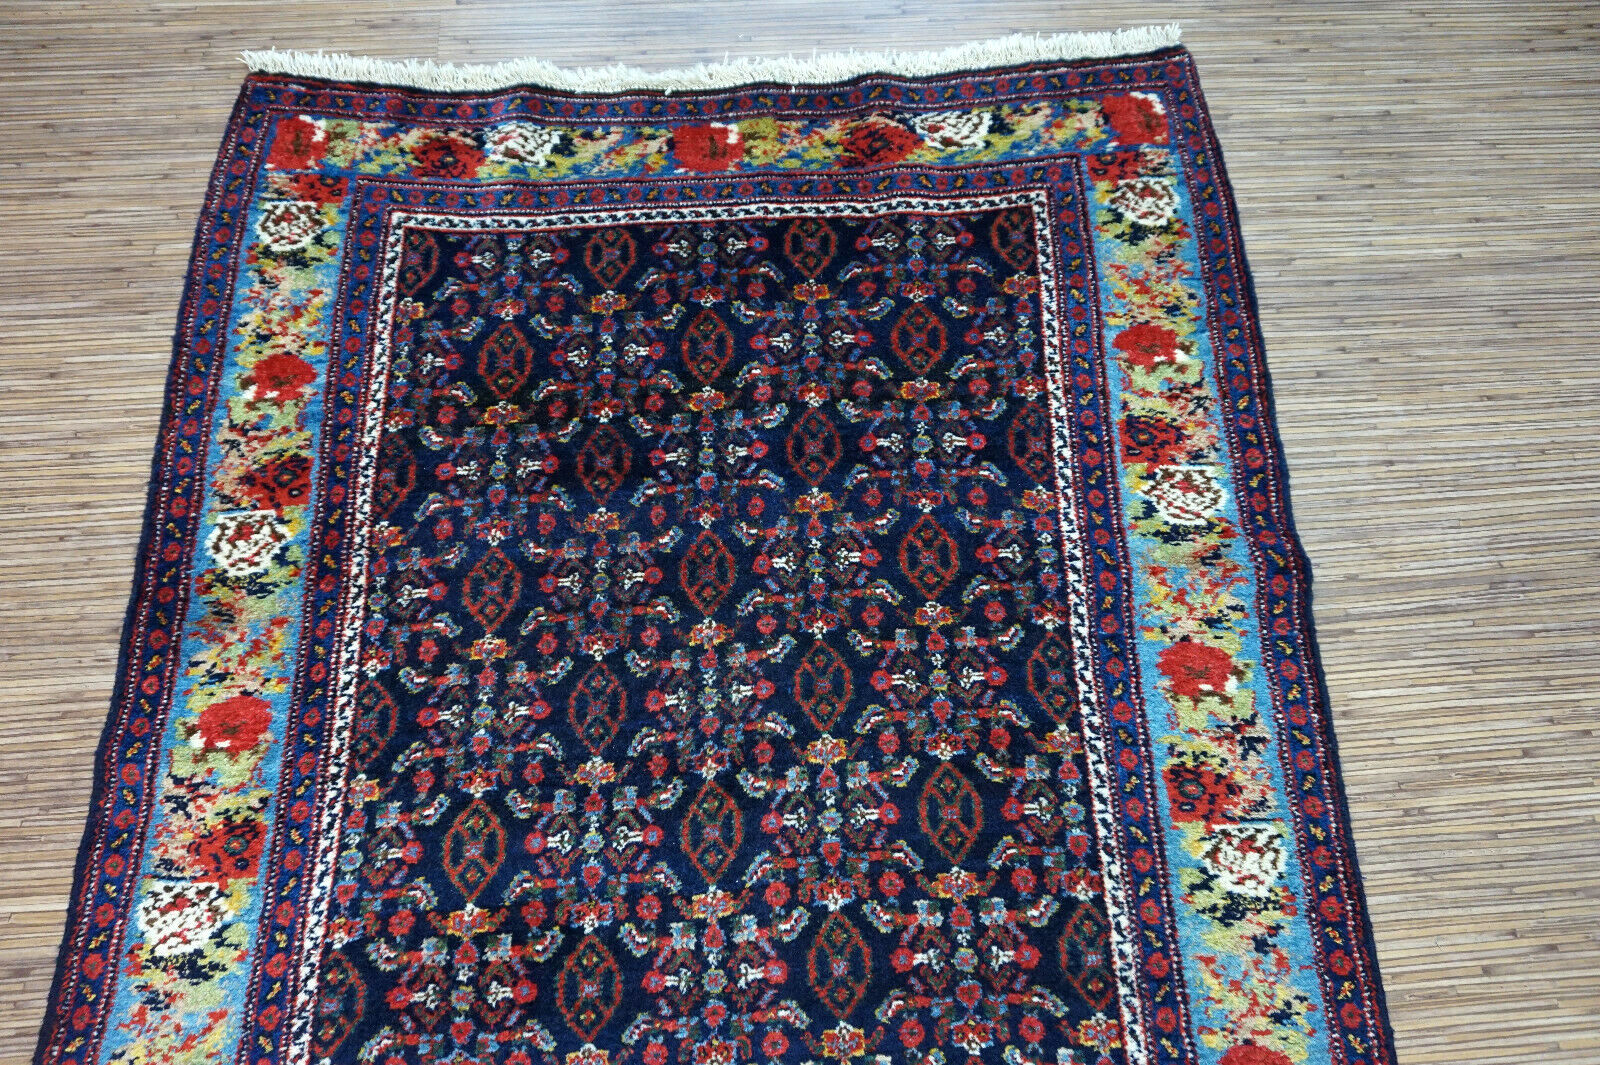 Handmade antique Persian Senneh runner in  deep shade of blue with repeating pattern. The rug is from the beginning of 20th century in original good condition.